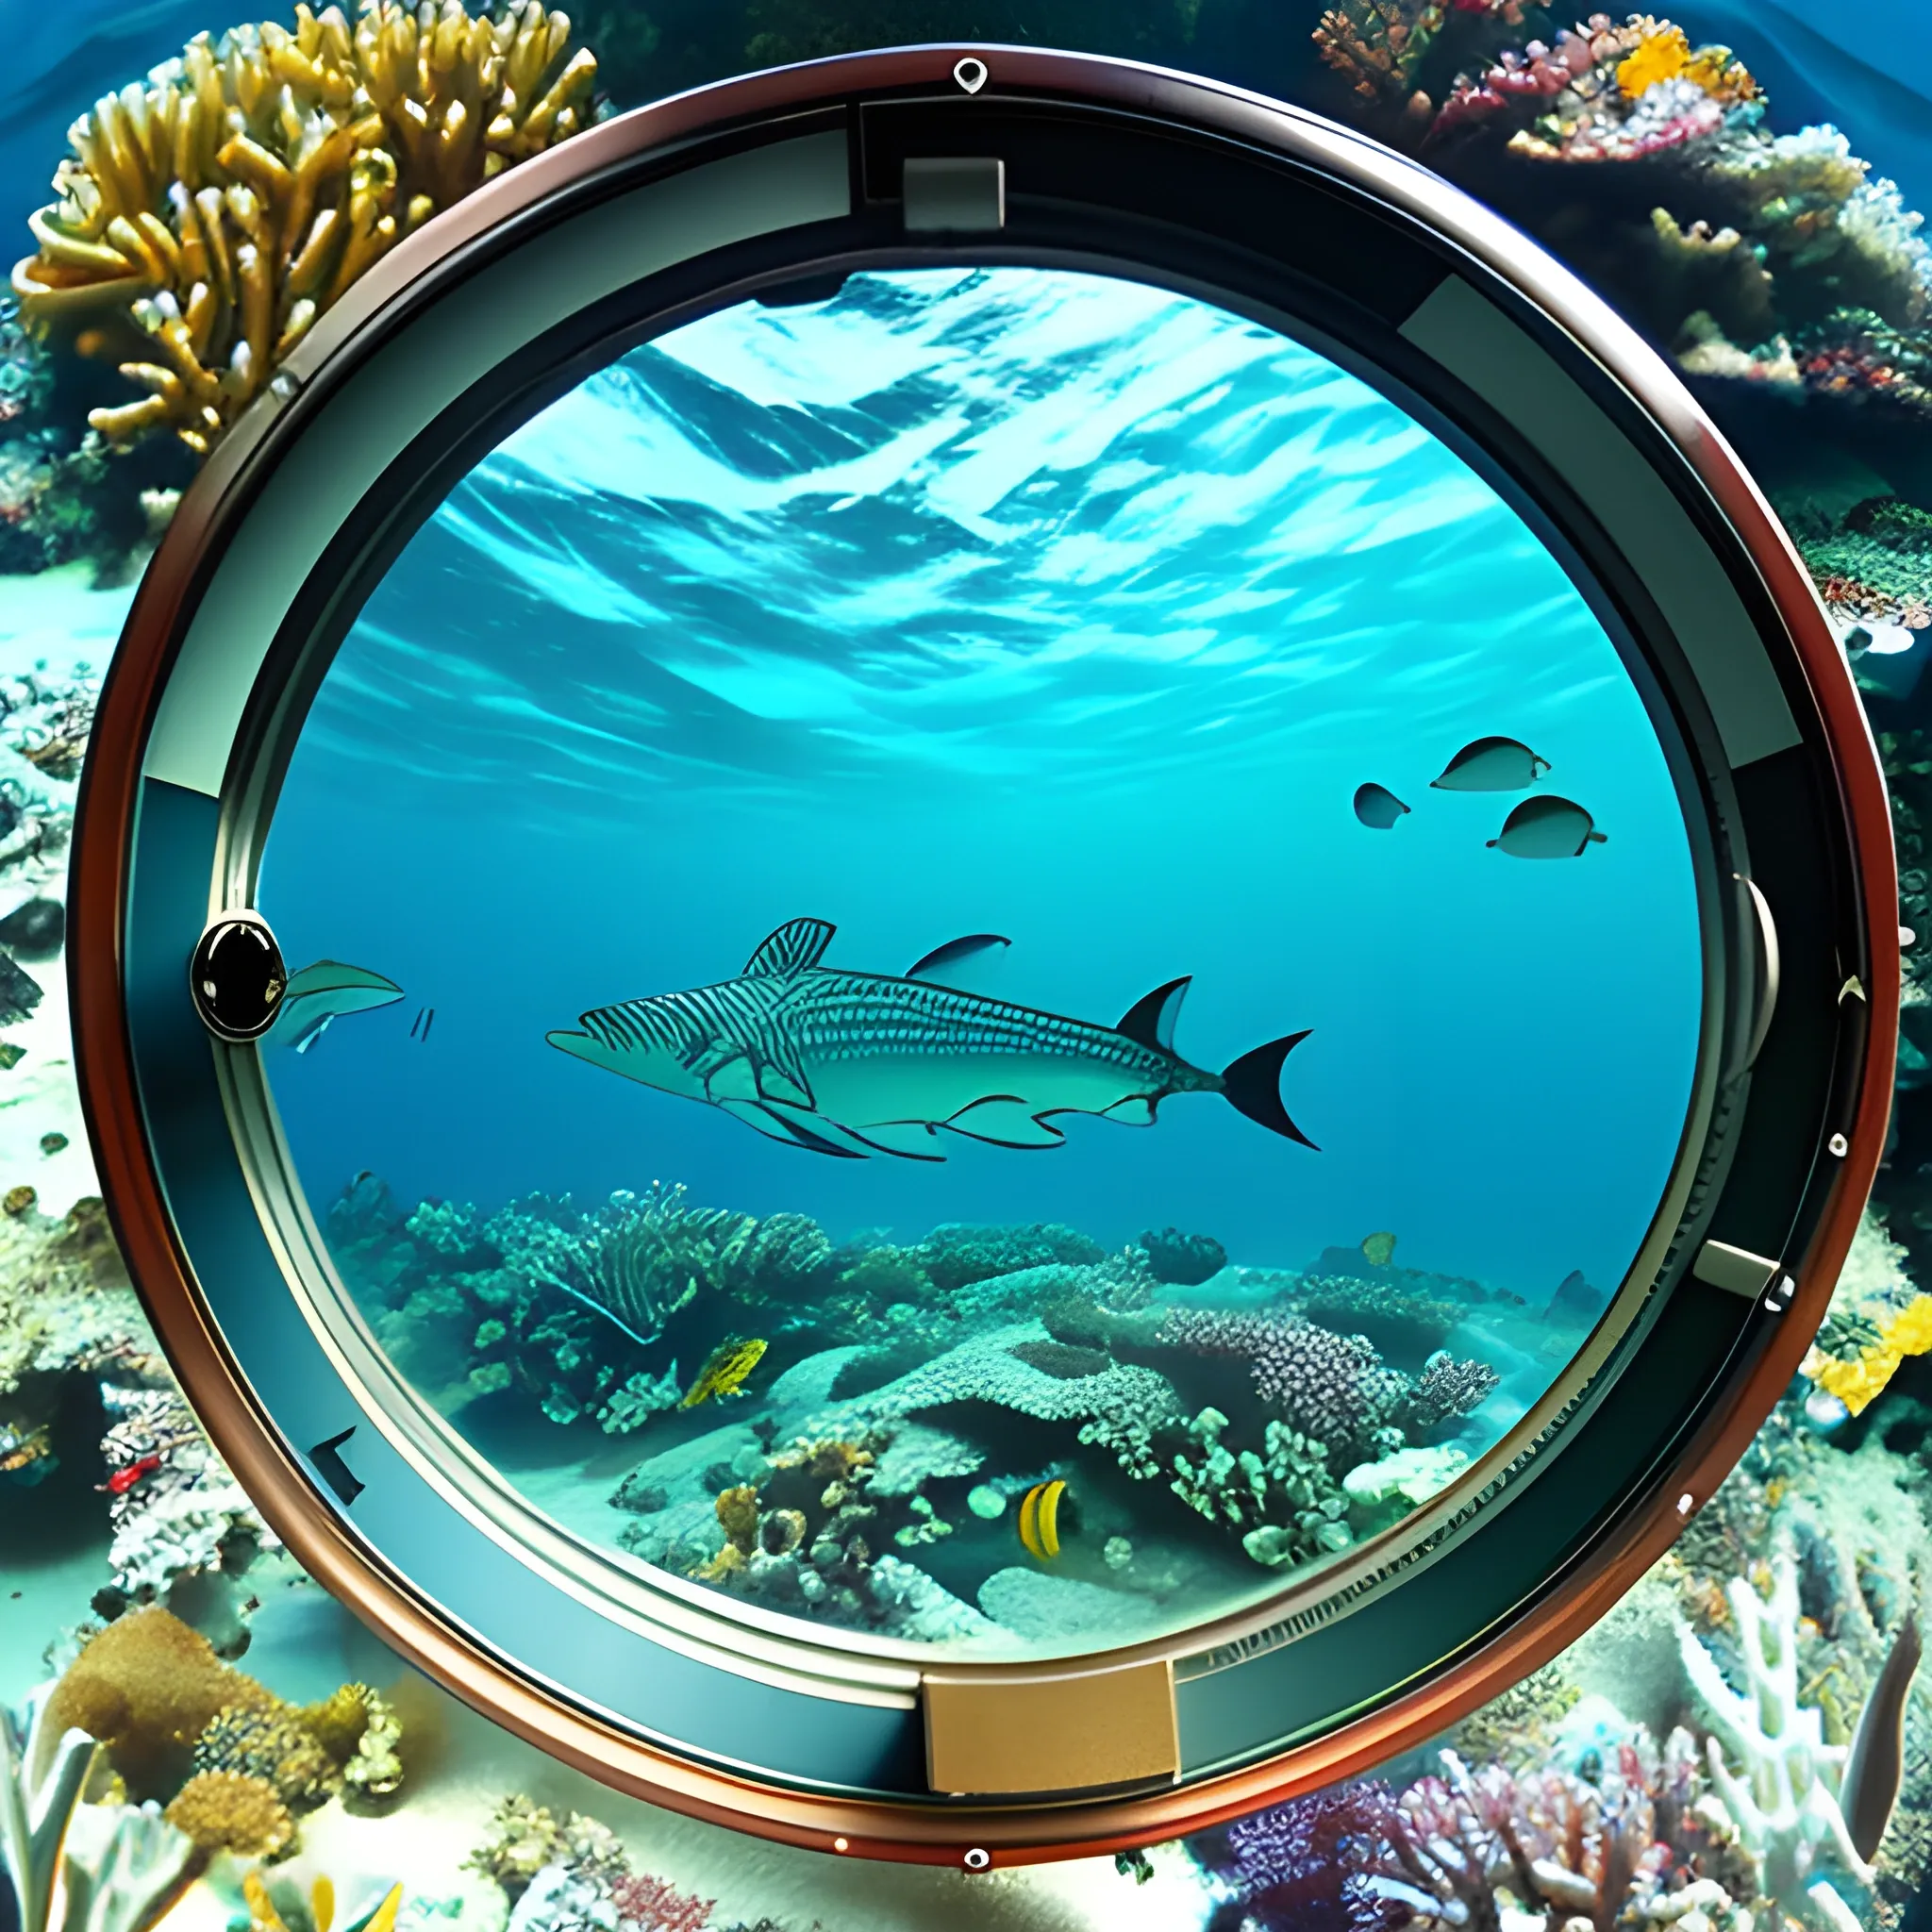 Out the porthole, capturing a sweeping360-degree panorama of the incredible diversity of marine life inhabiting these waters, from scintillating schools of mullet to solitary mackerel and crowds of colorful reef fish.